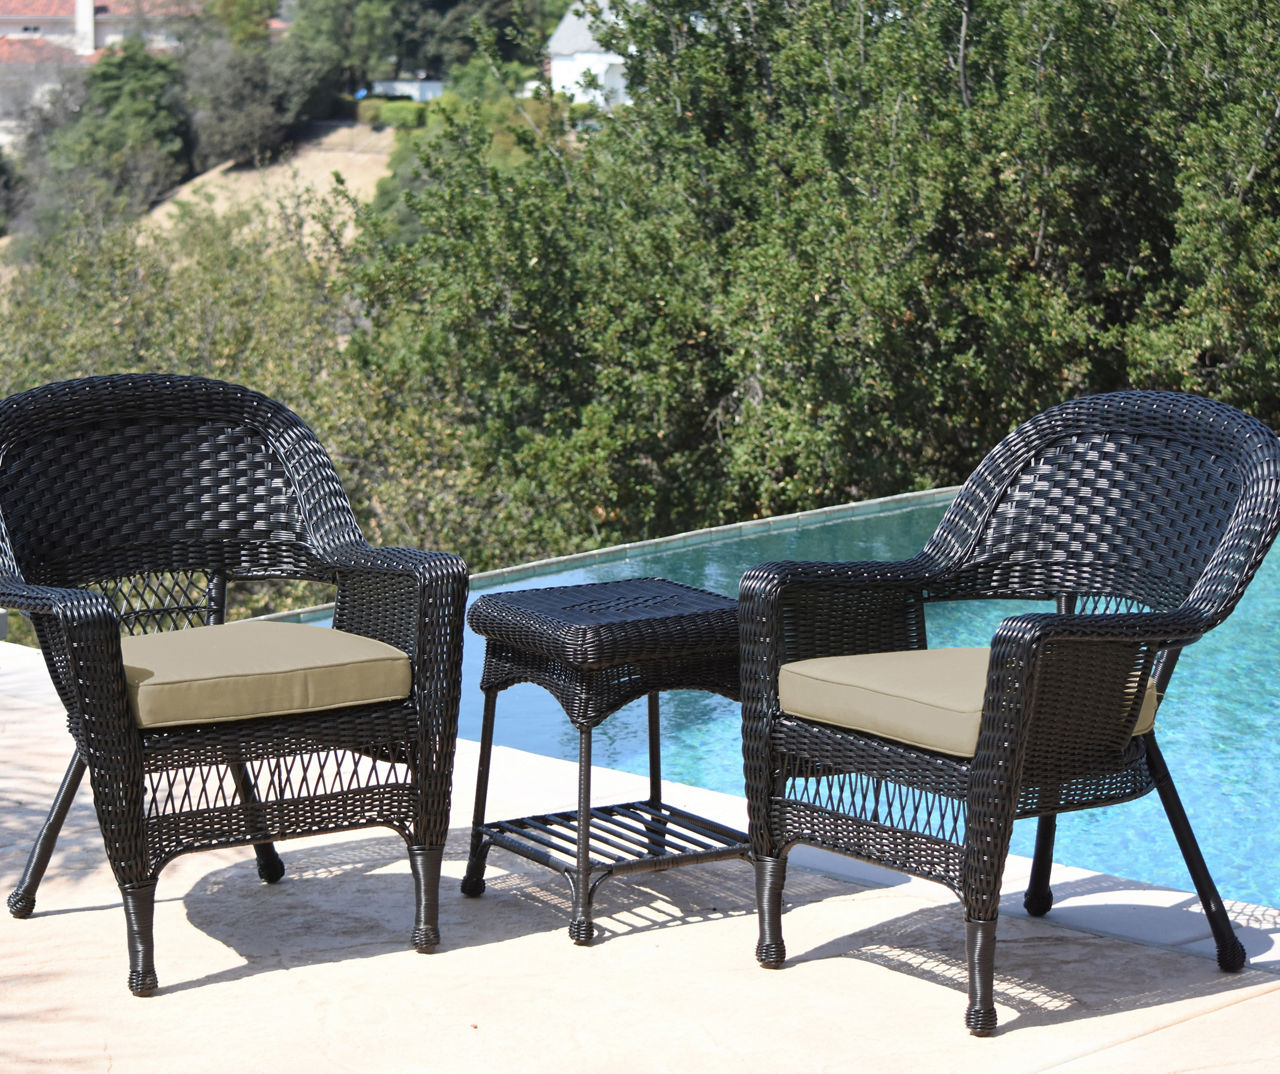 Black 3-Piece Patio All-Weather Wicker Chat Set with Tan Cushions